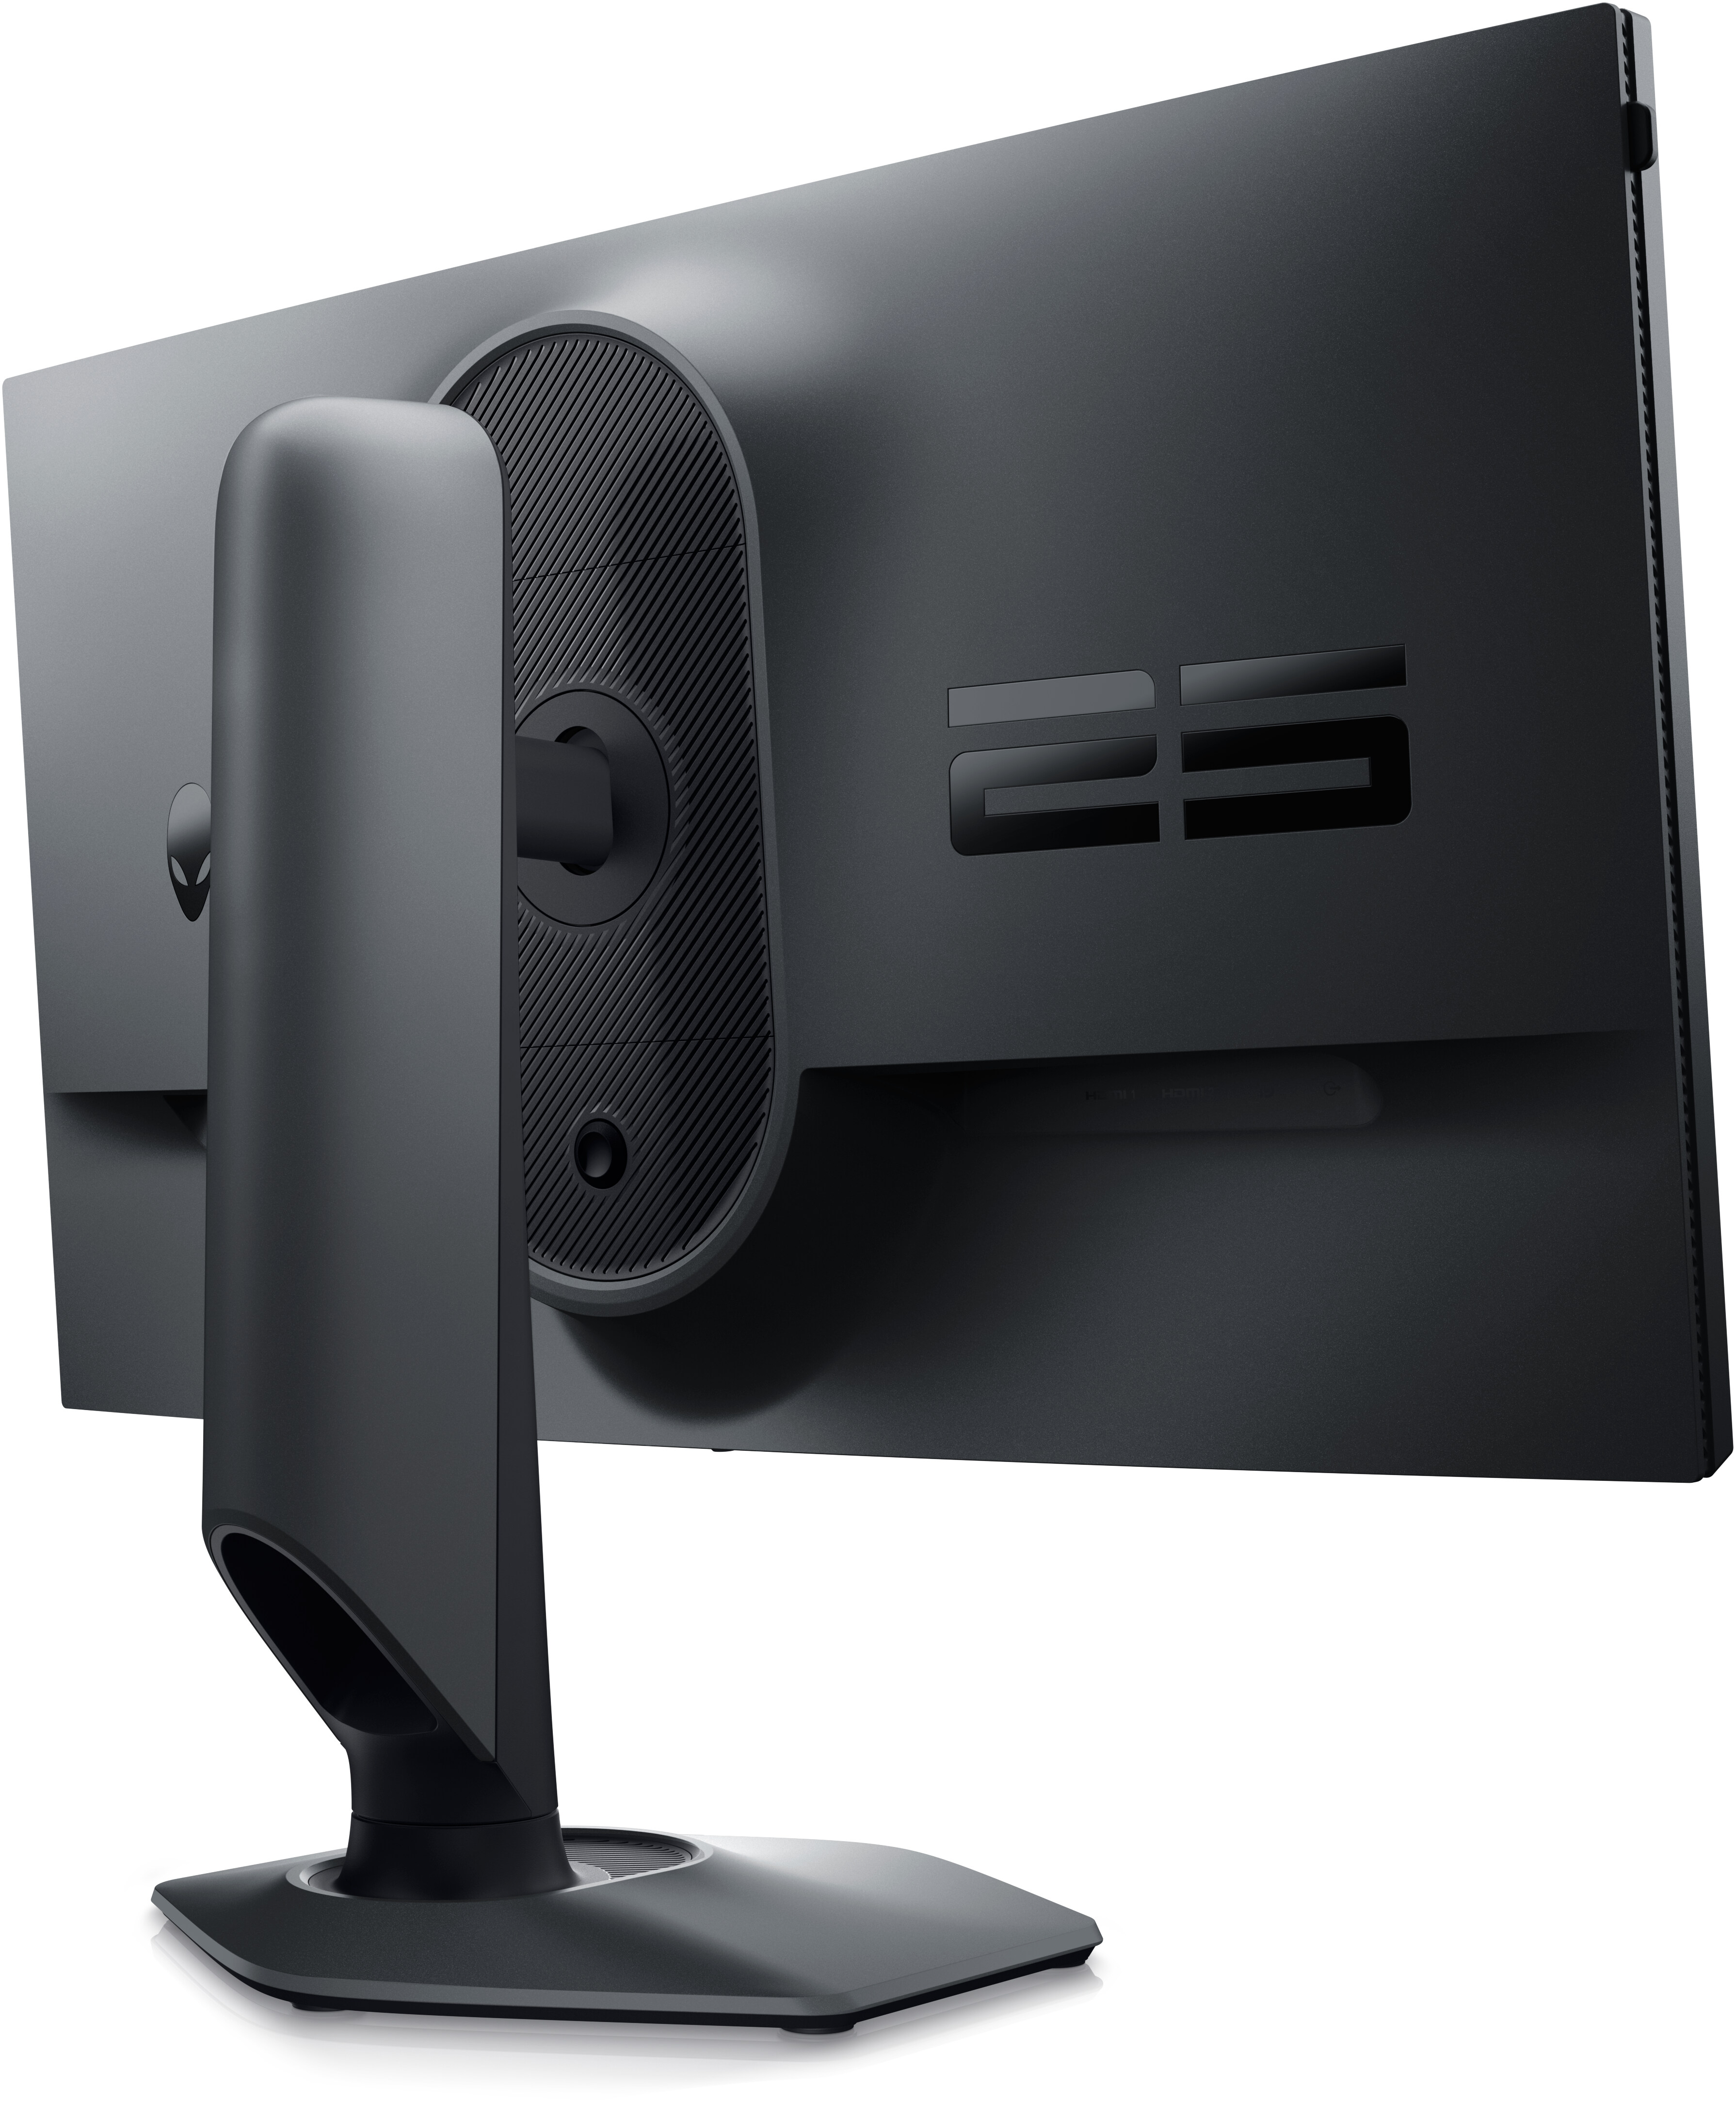 Alienware 25 Inch Gaming Monitor (AW2523HF) | Dell USA